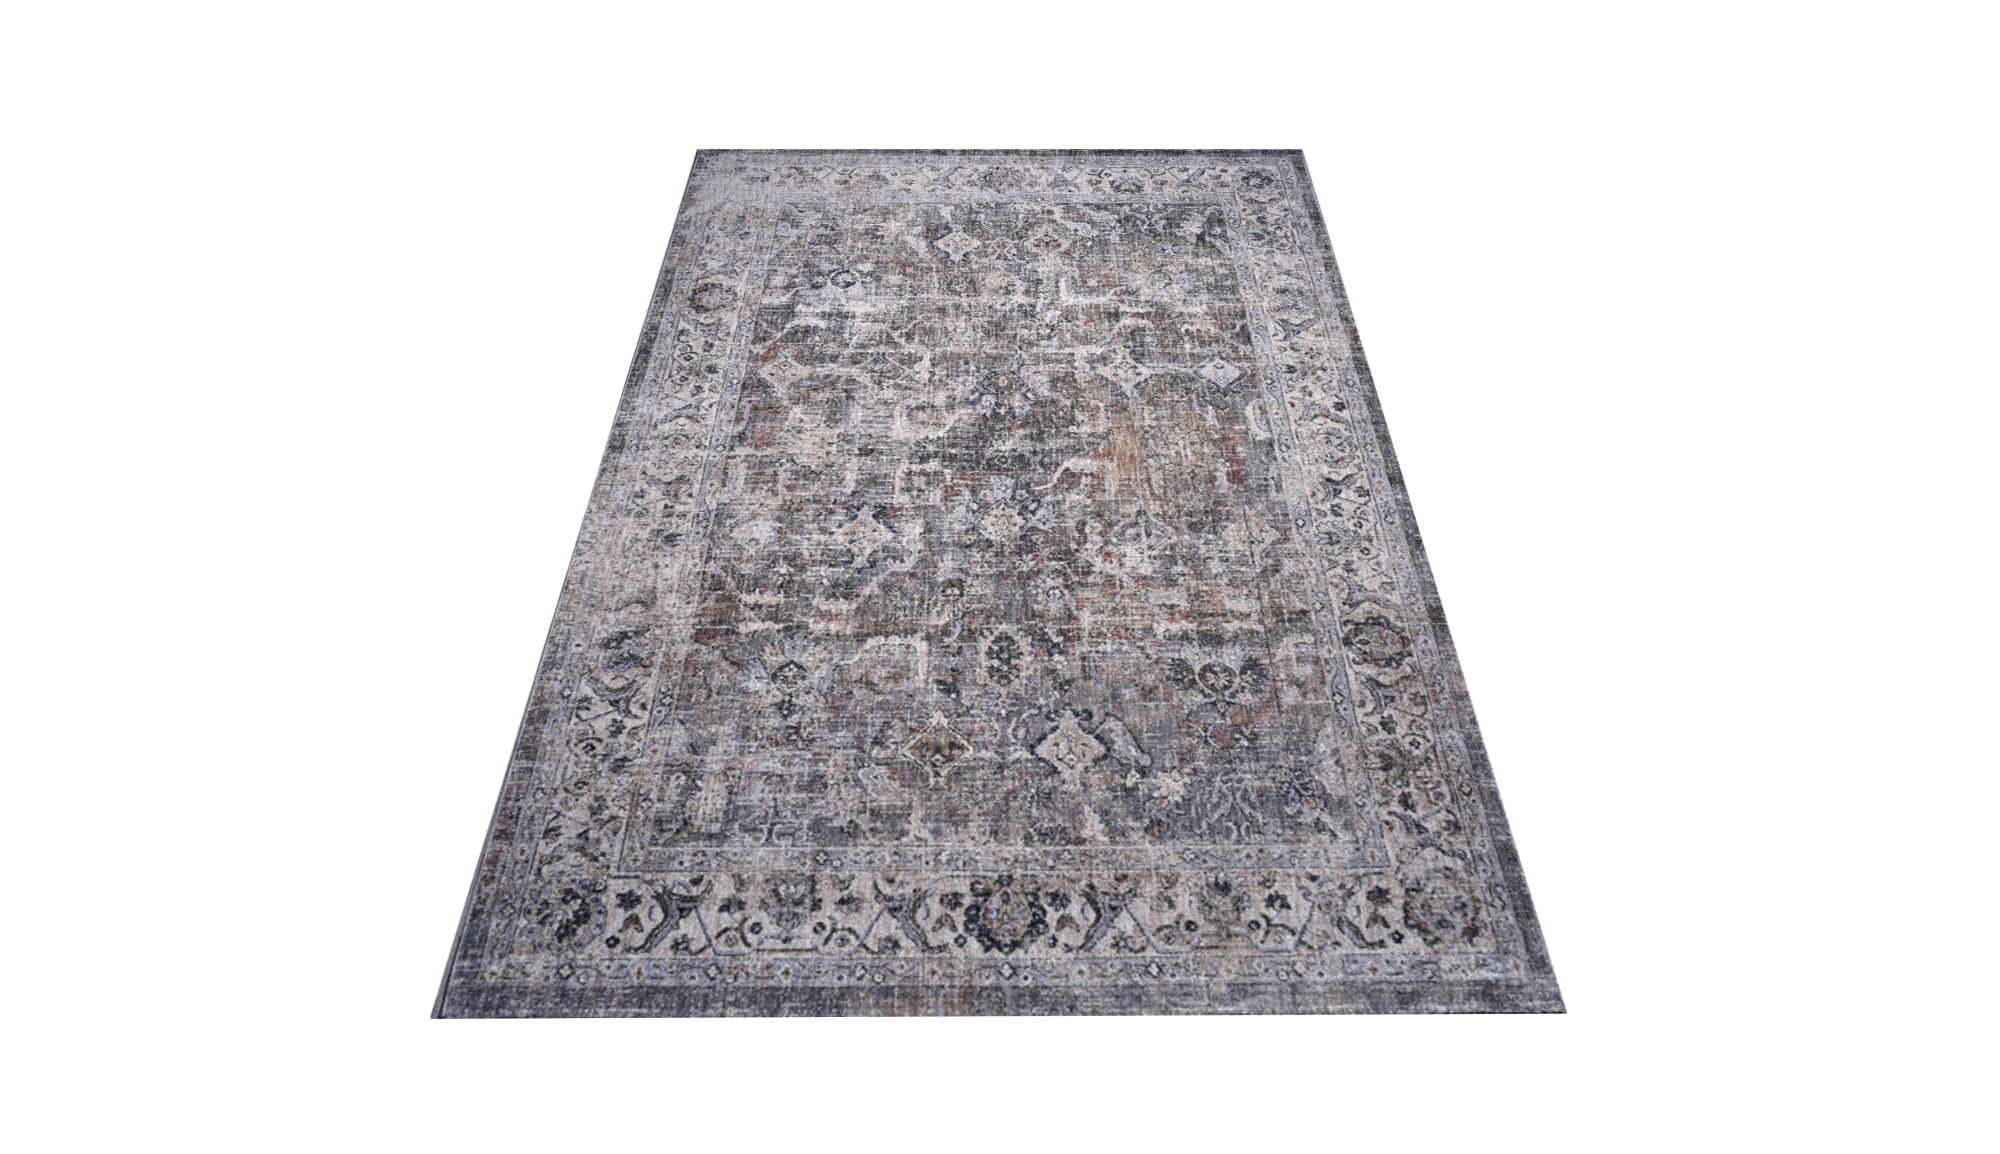 Baron Jade Woven Rug-Area rug for living room, dining area, and bedroom